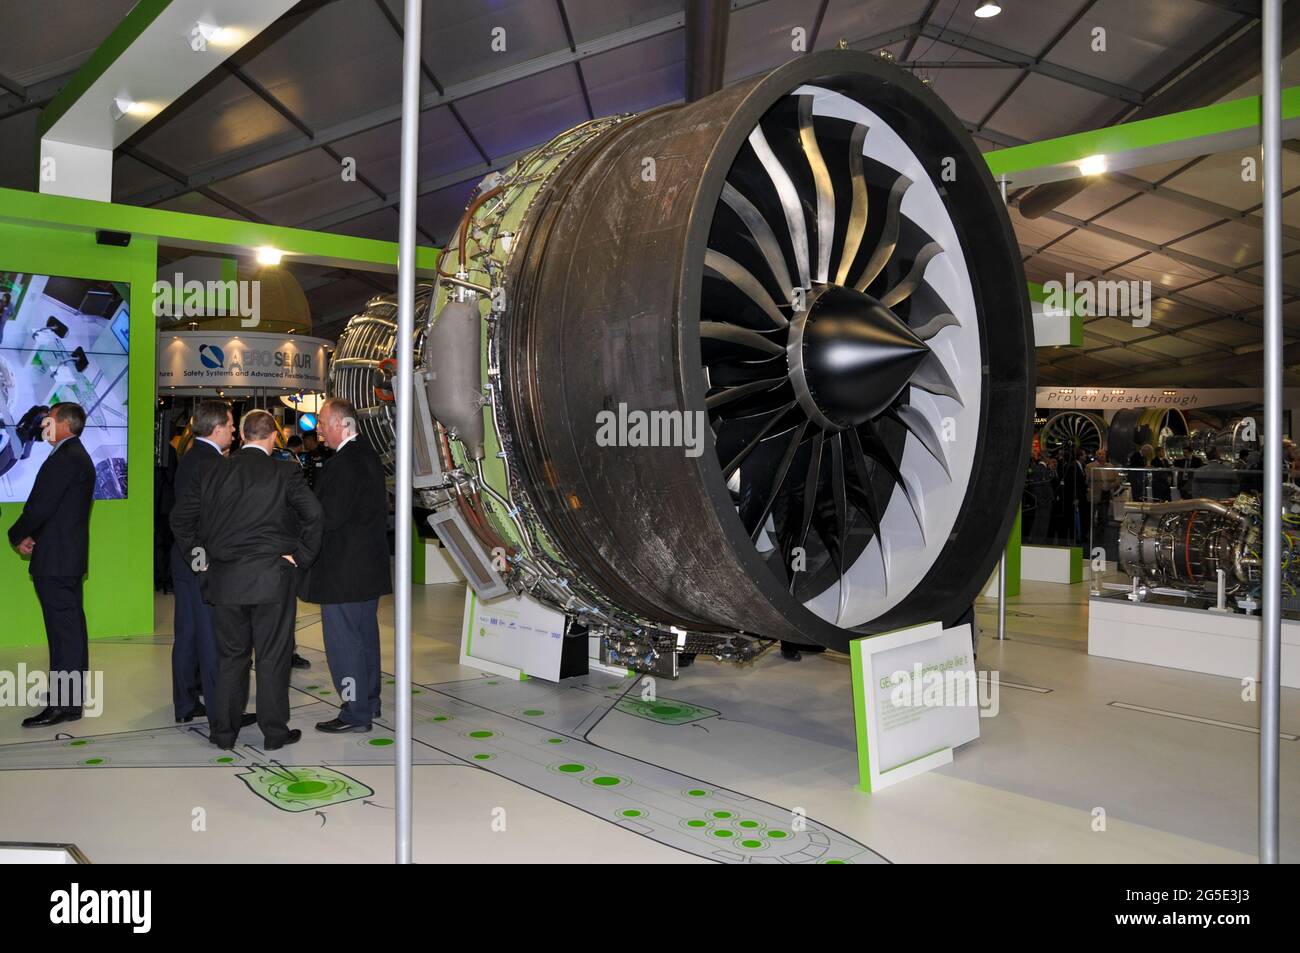 General Electric GEnx turbofan engine on display at the Farnborough International Airshow trade fair 2012, UK. Business representatives on trade stand Stock Photo